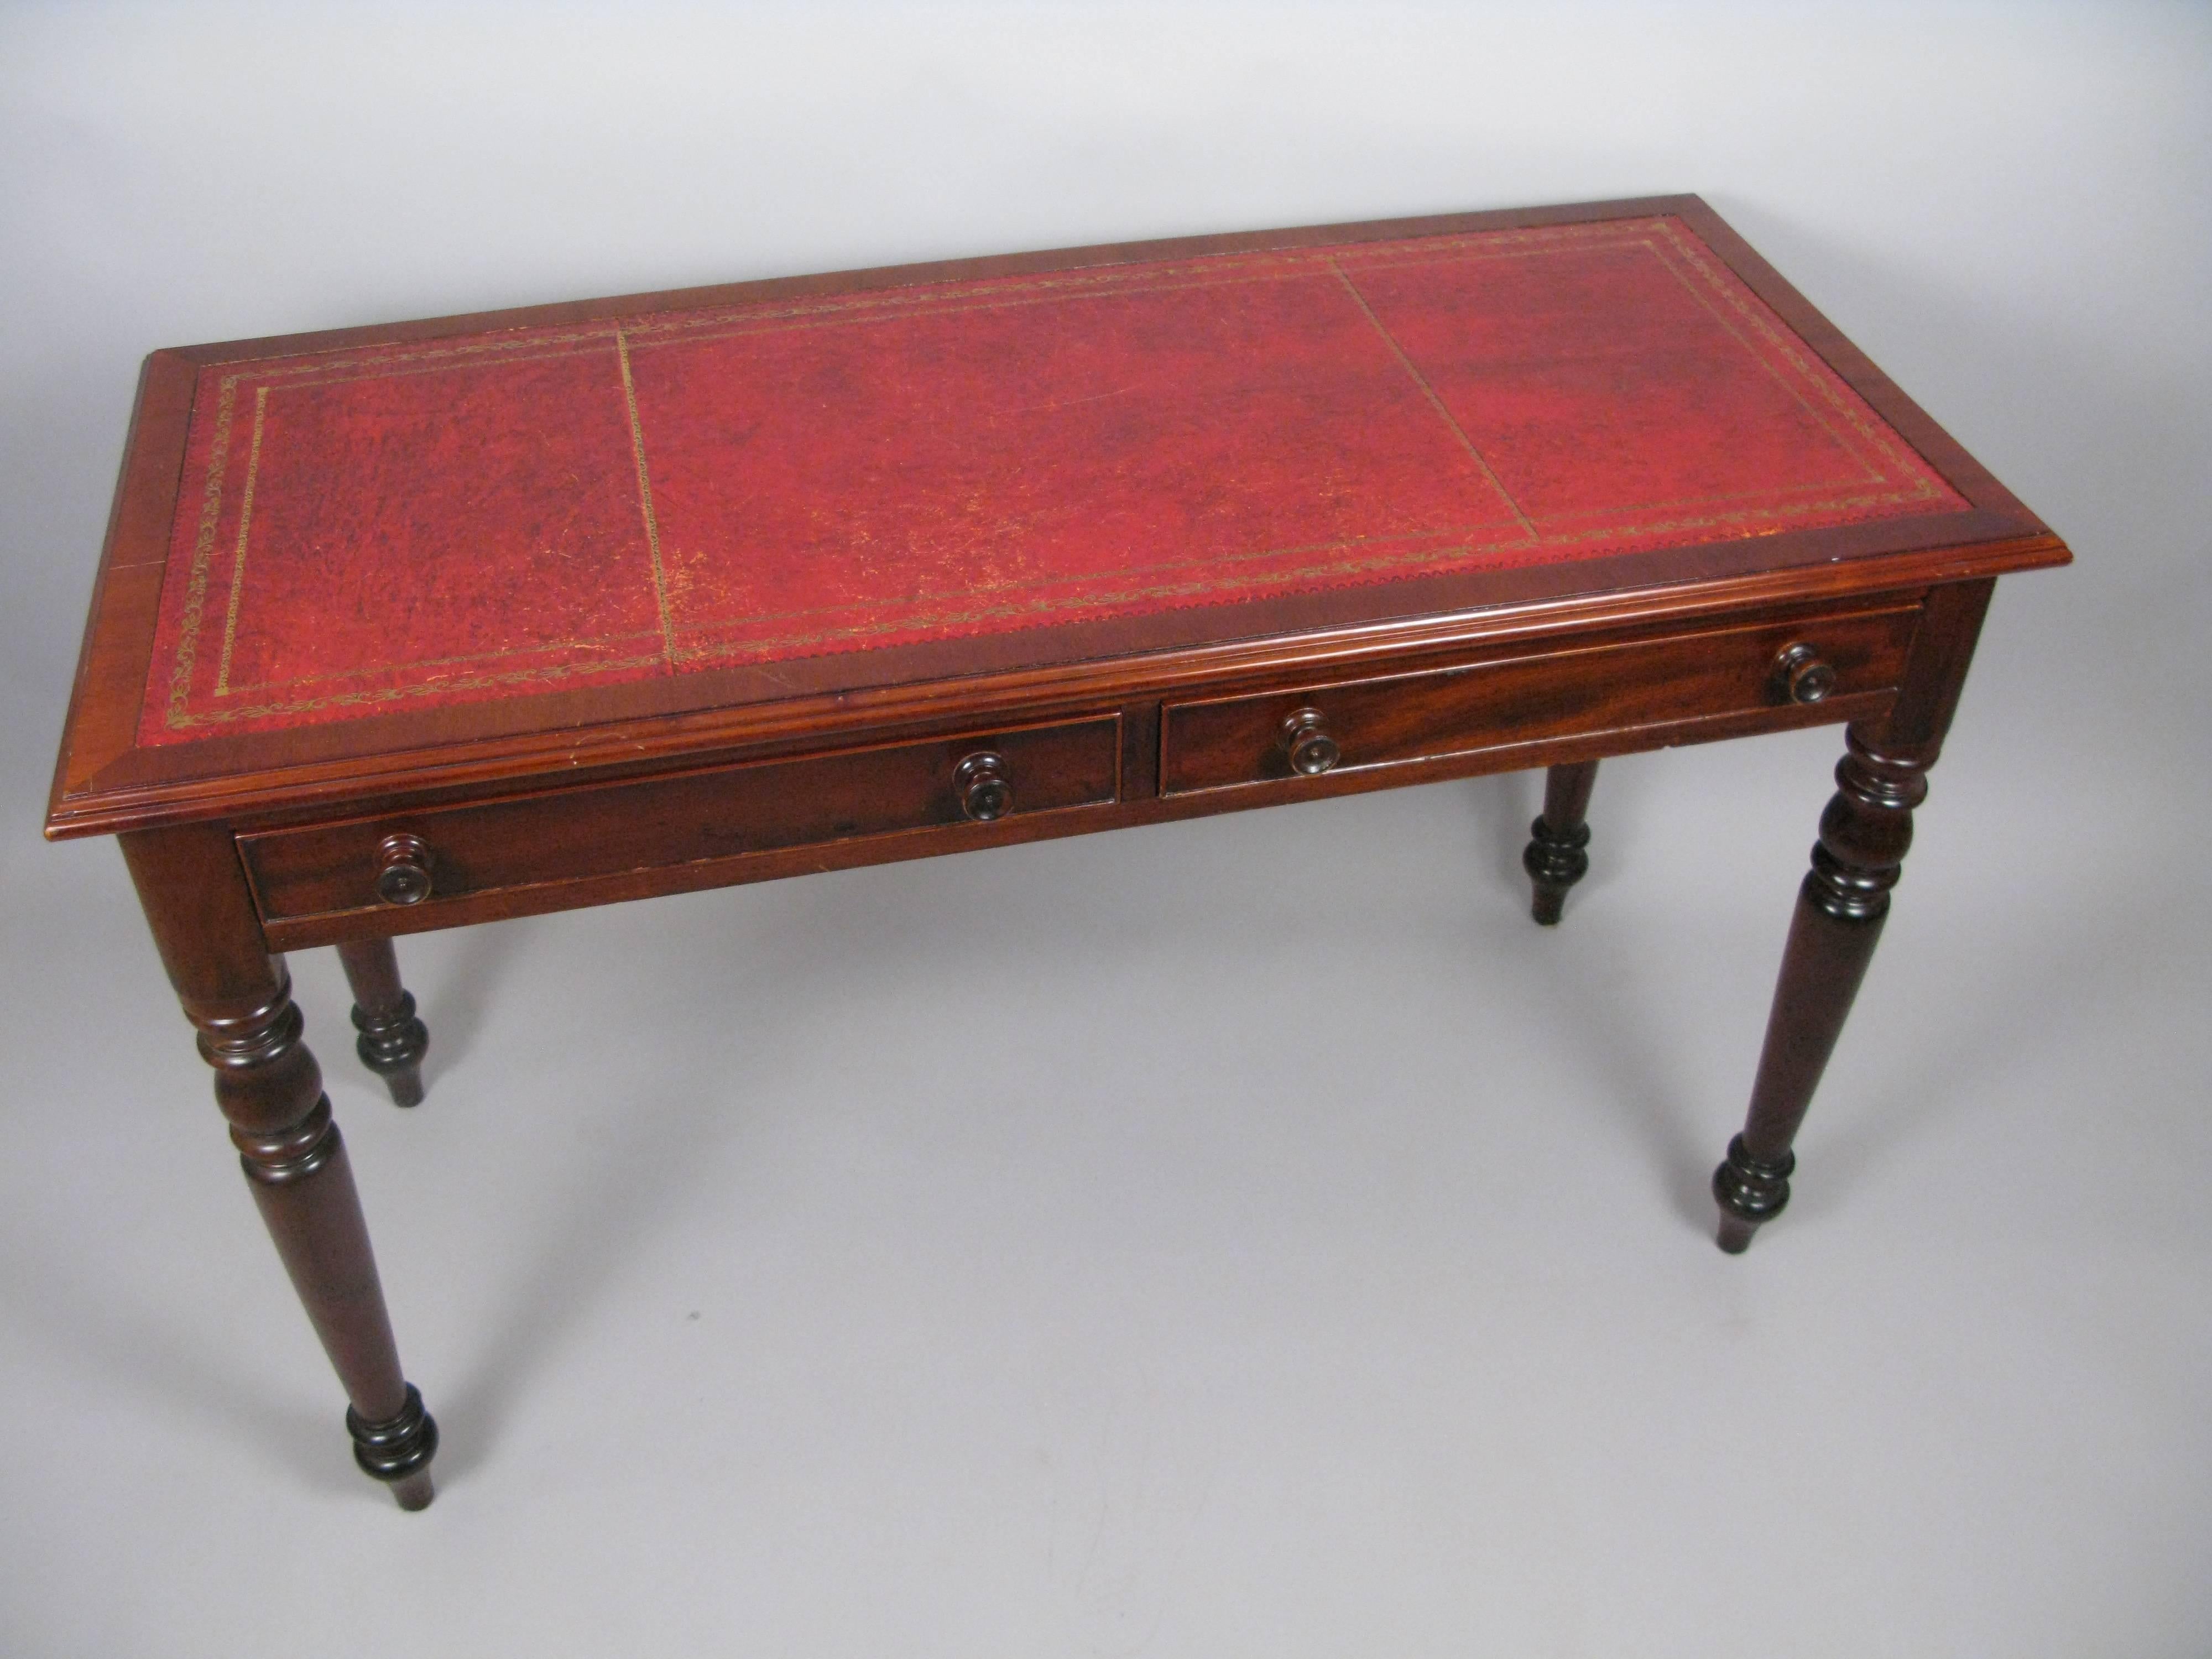 William IV 19th Century English Mahogany and Leather Top Writing Desk